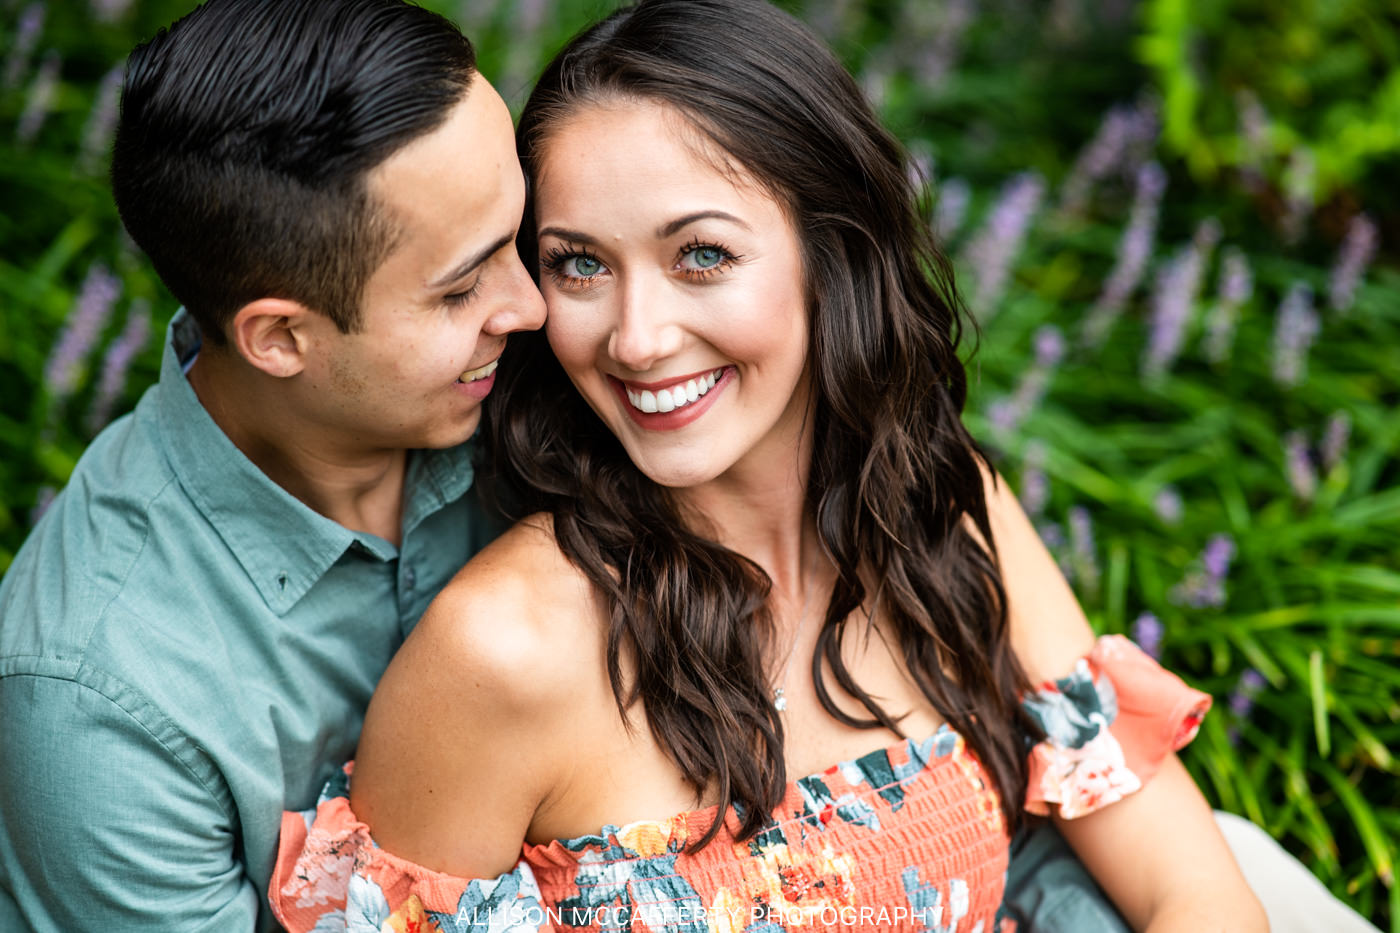 South Jersey Engagement Session Location Ideas